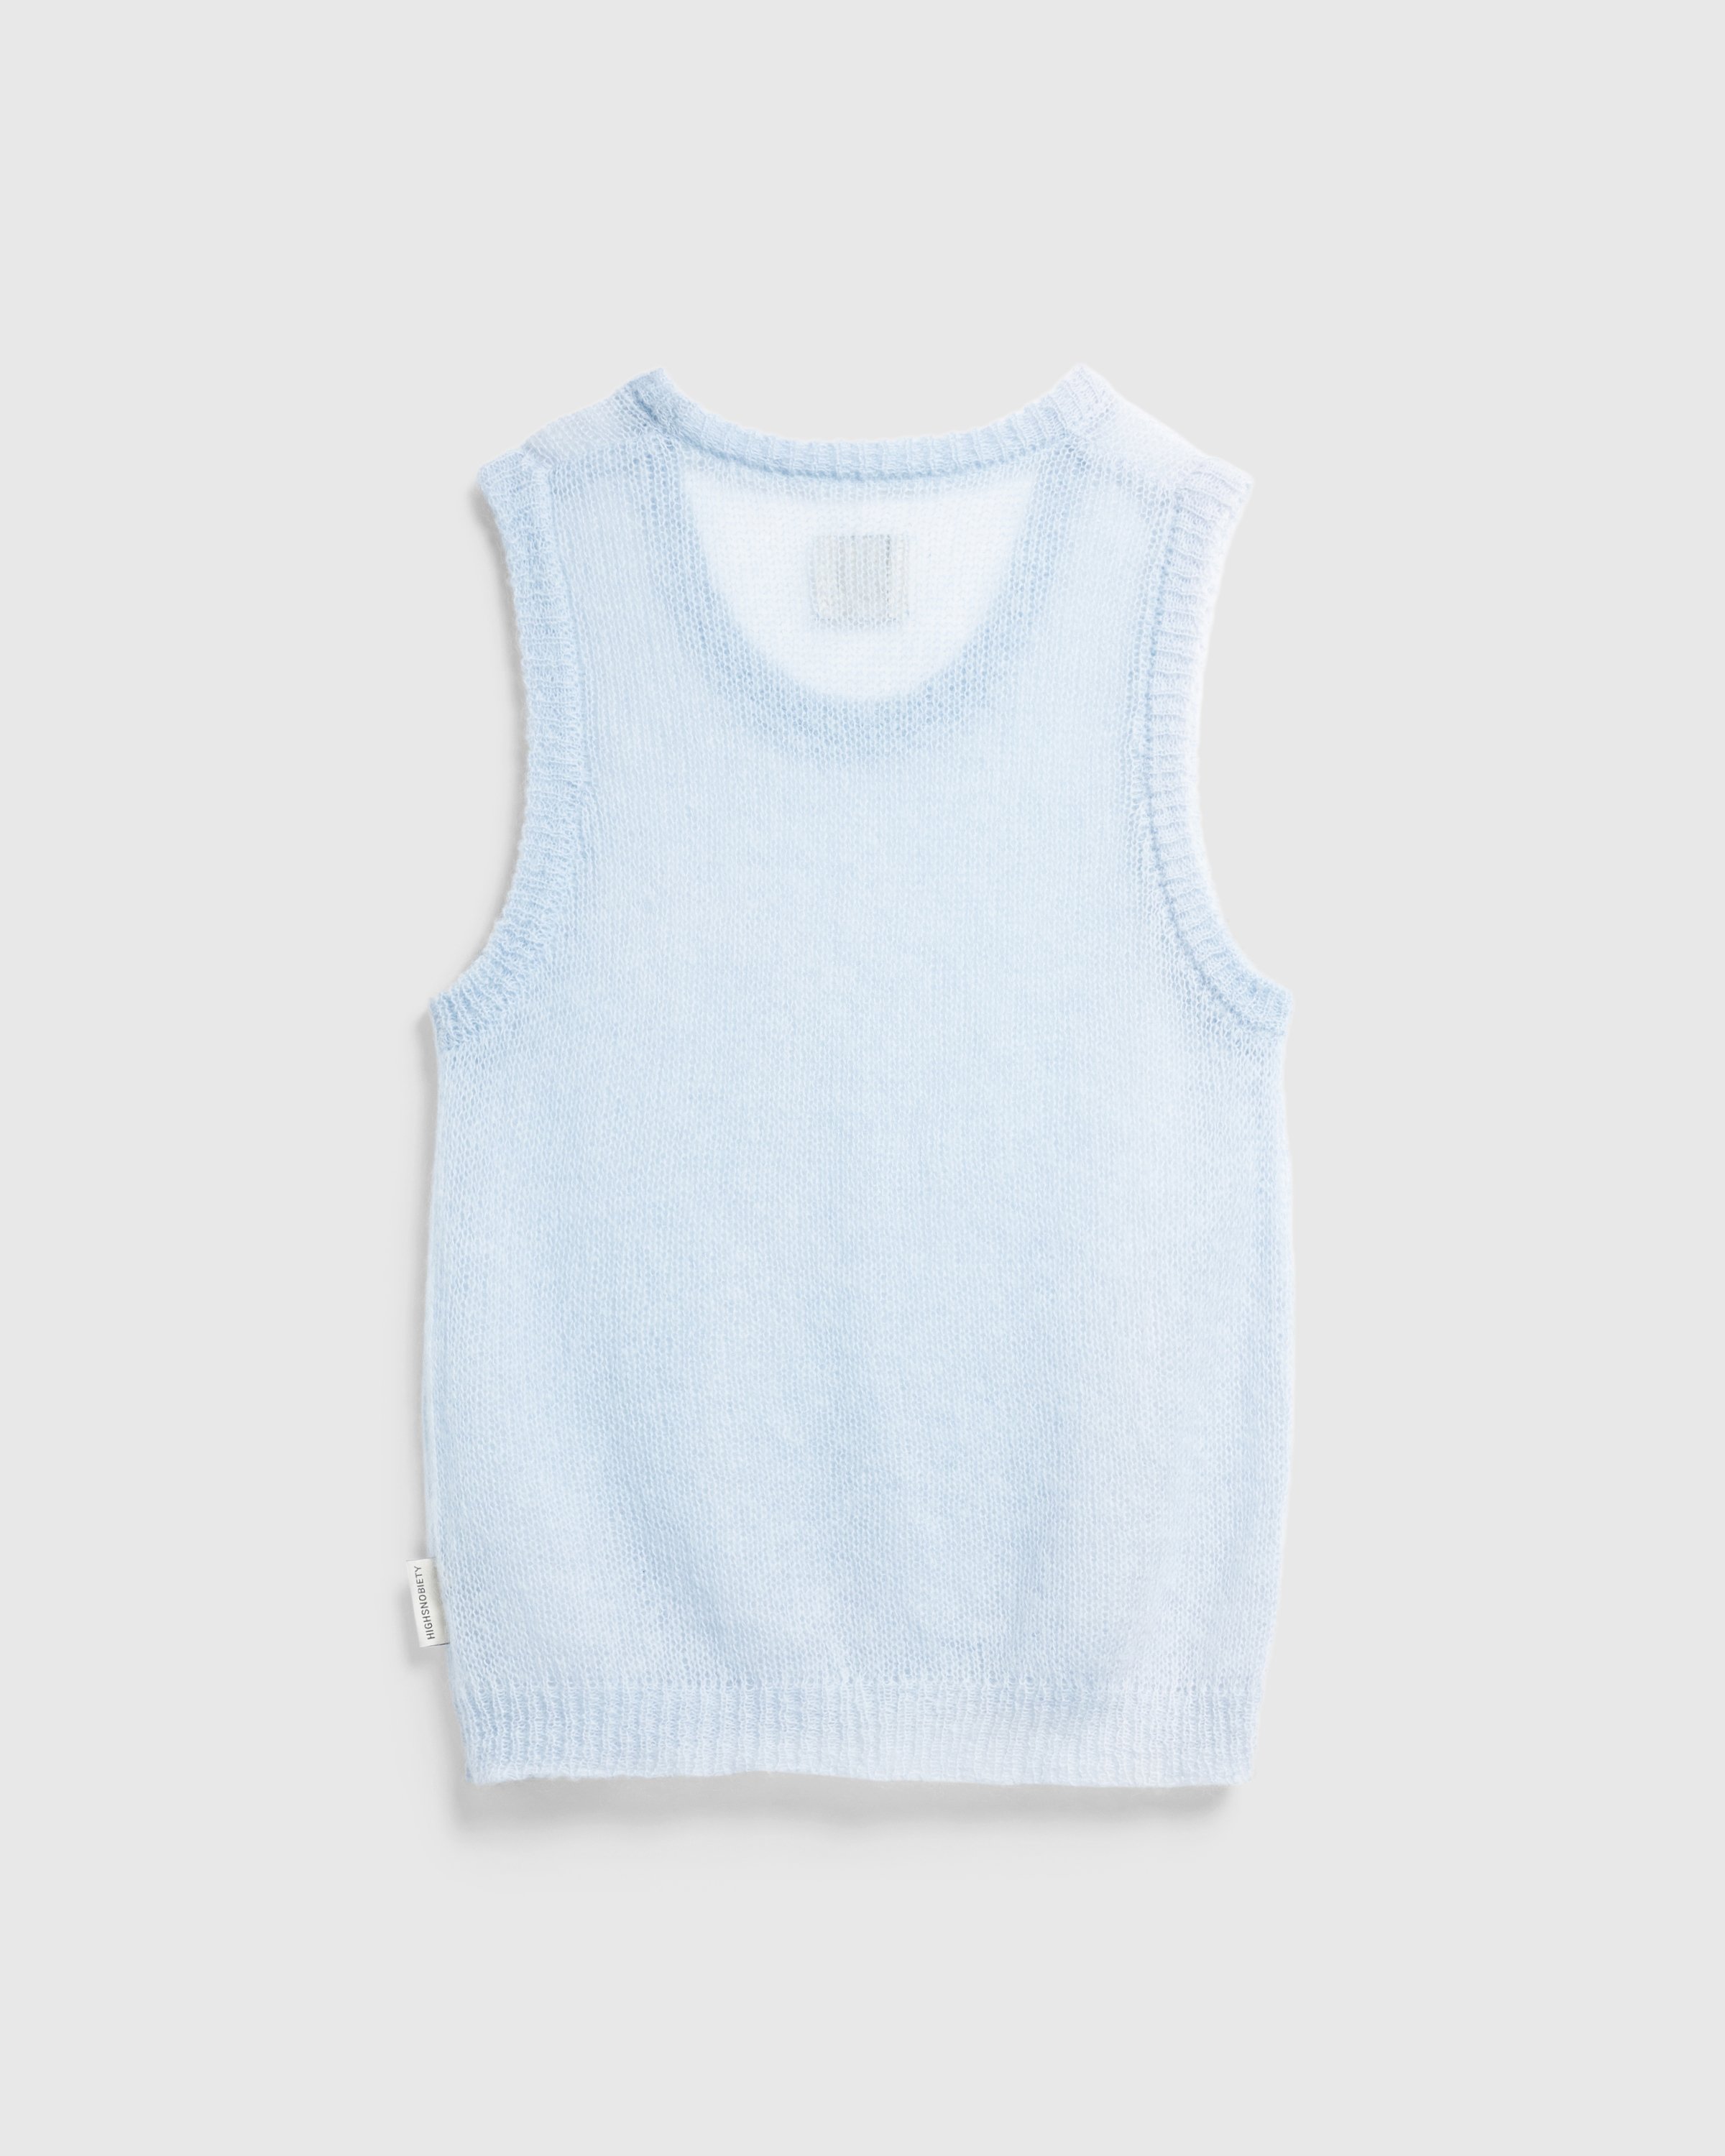 Highsnobiety HS05 - Loose Gage Tank Top Blue - Clothing - Blue - Image 2